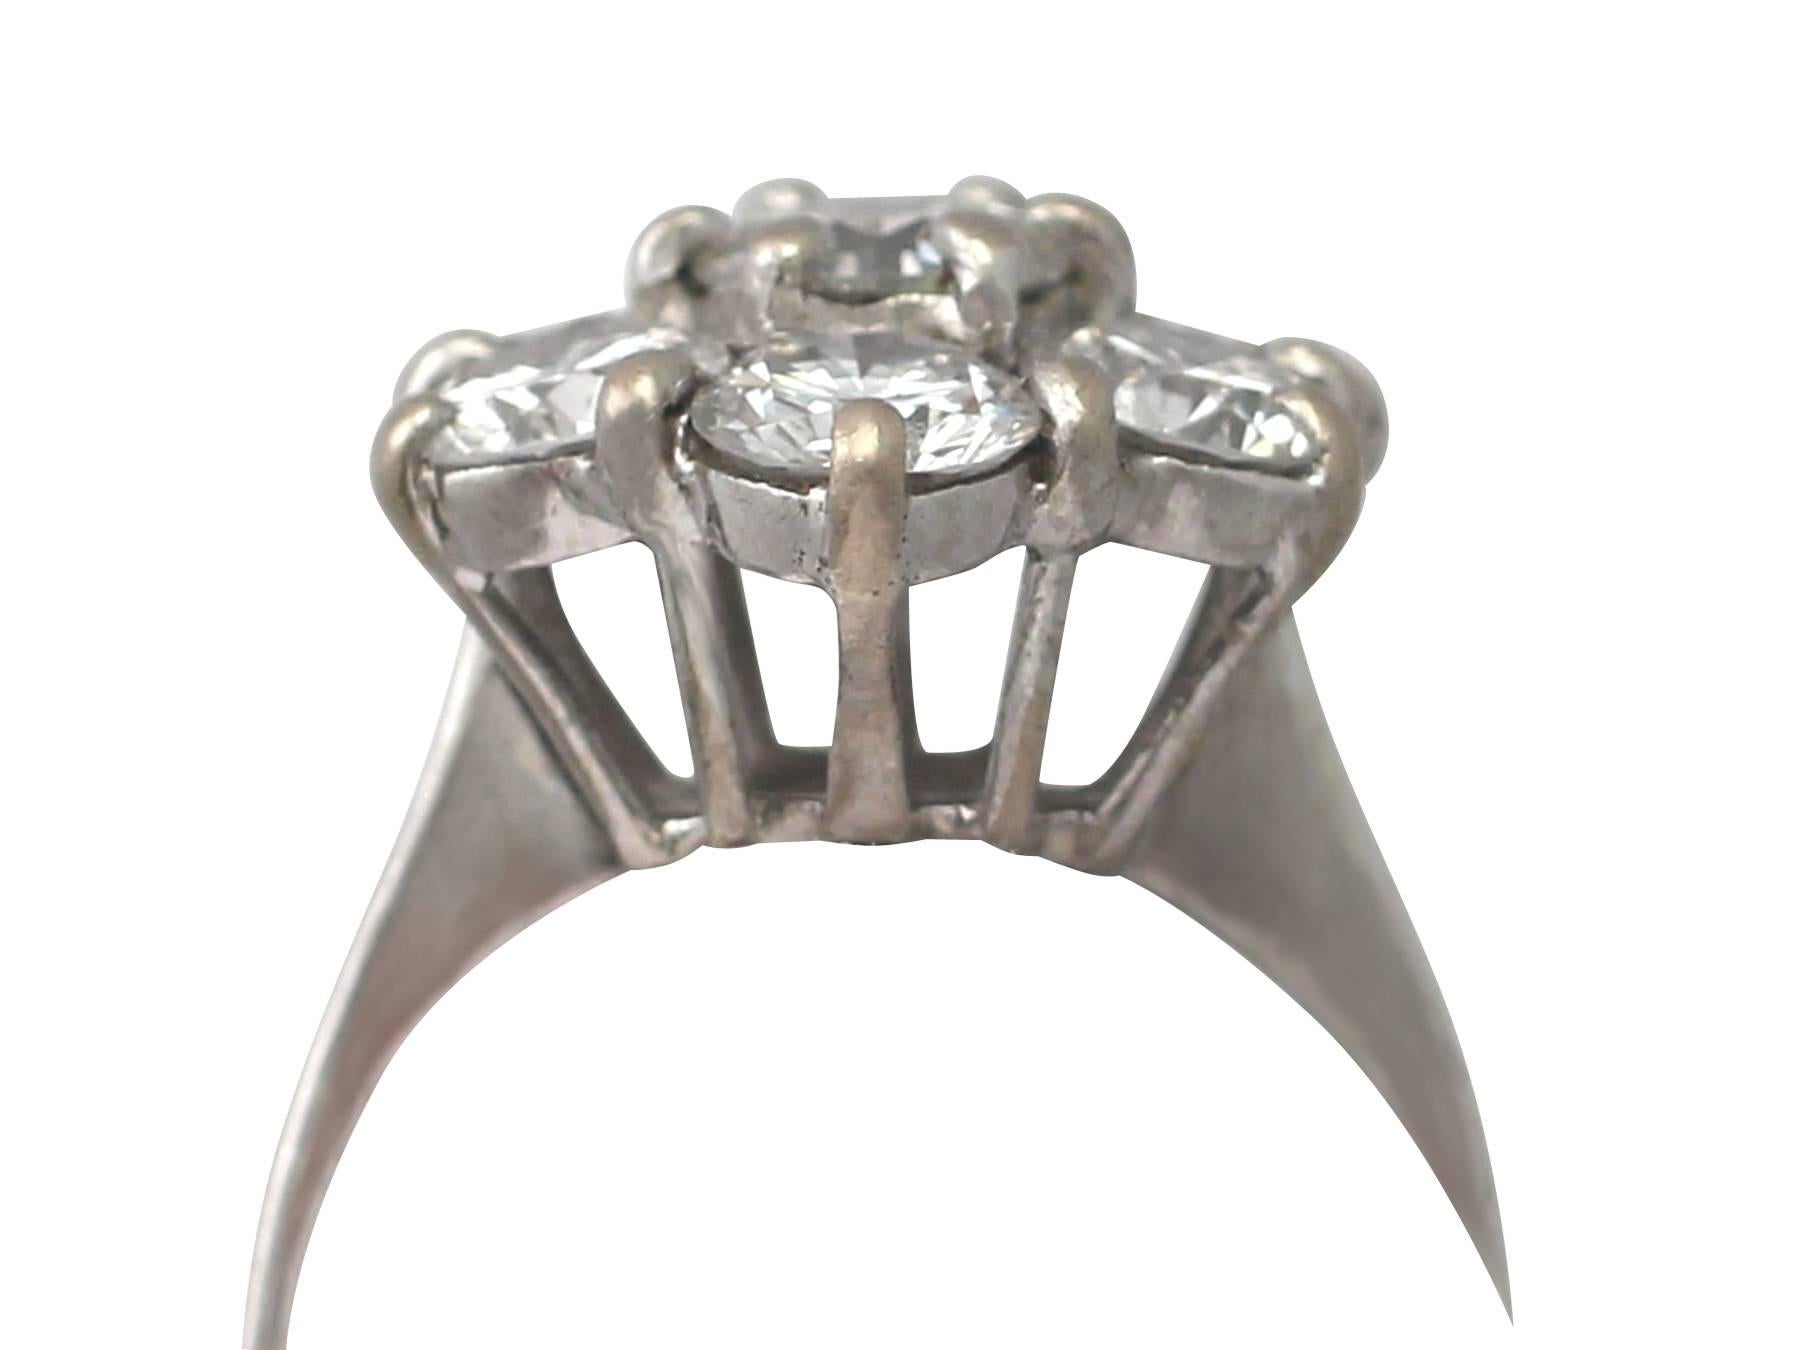 A stunning, fine and impressive vintage 3.02 carat diamond and 18 carat white gold cluster ring; an addition to our diverse range of diamond jewelry

This fine and impressive vintage cluster ring has been crafted in 18k white gold.

The pierced